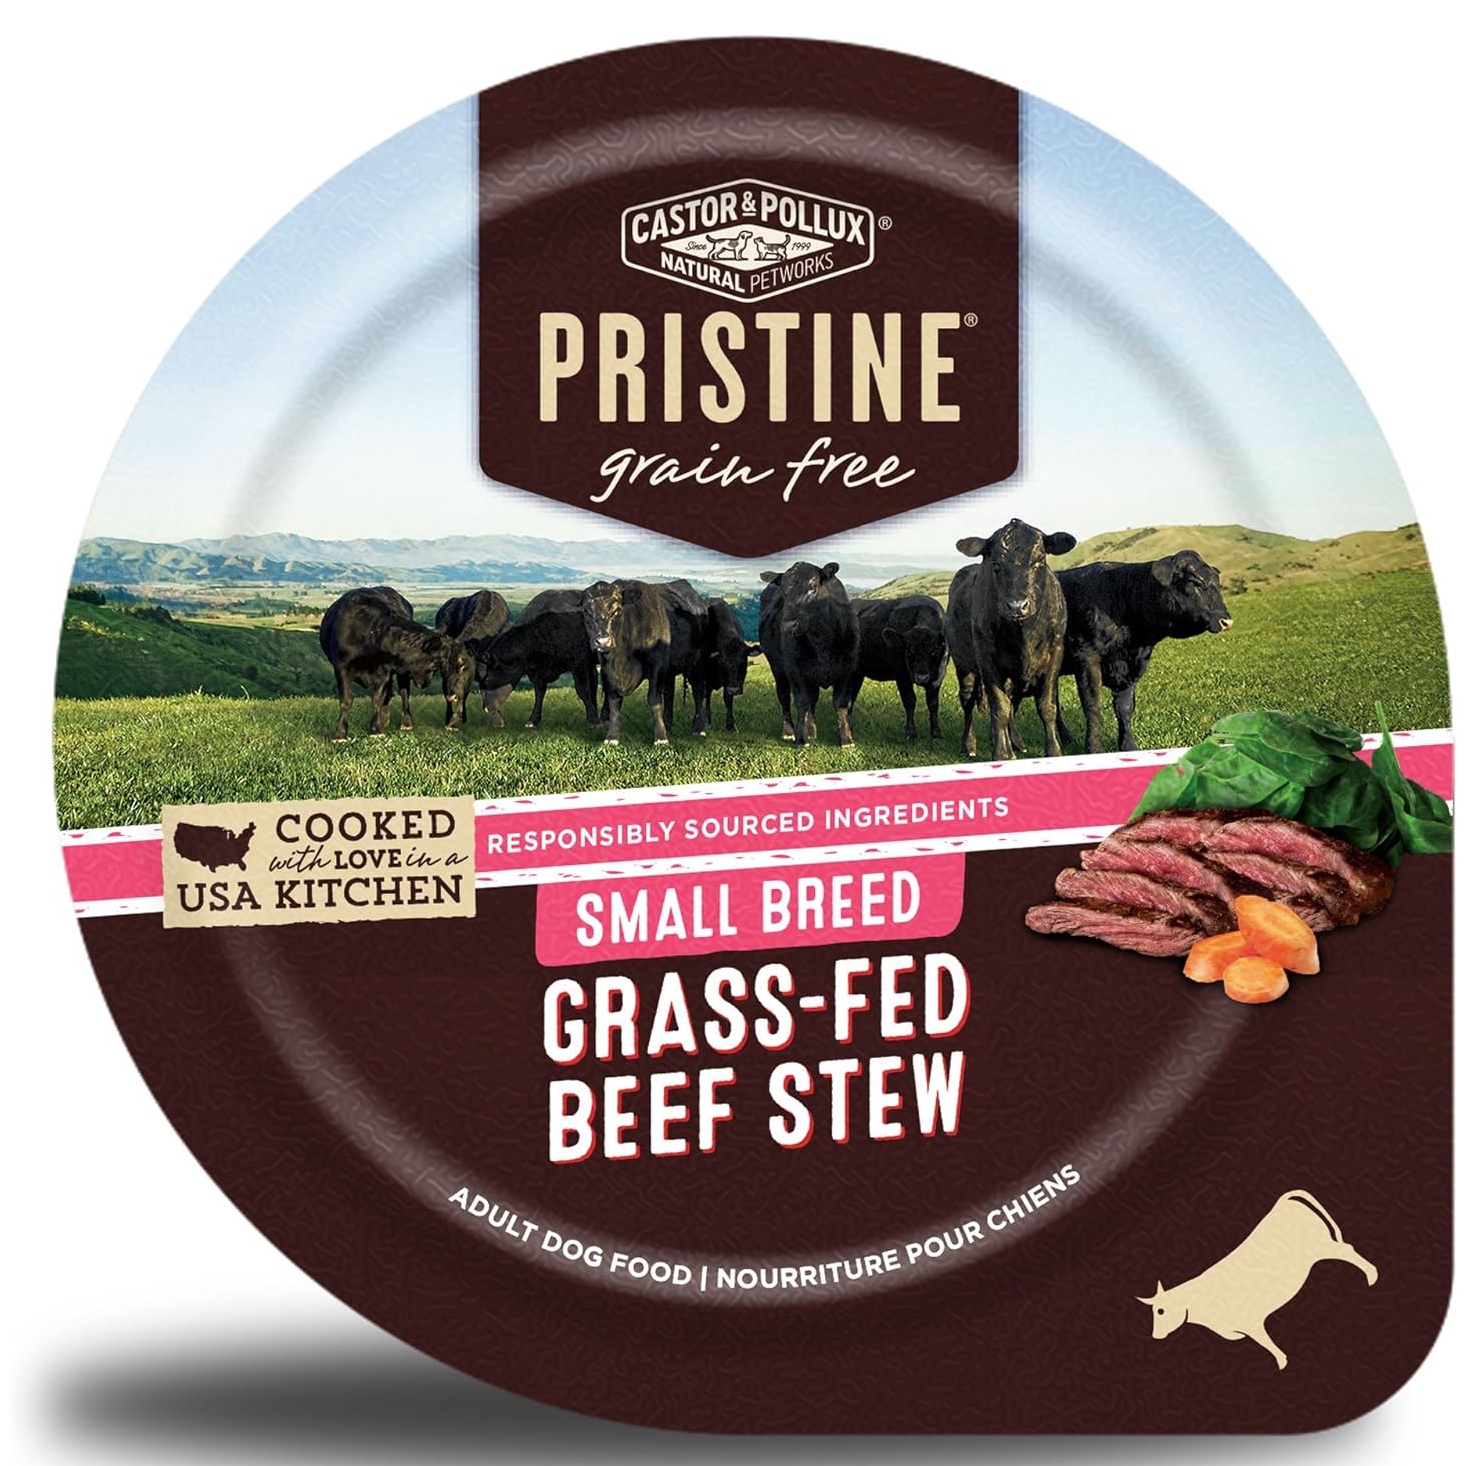 Castor & Pollux PRISTINE Grain-Free Small Breed Canned Dog Food